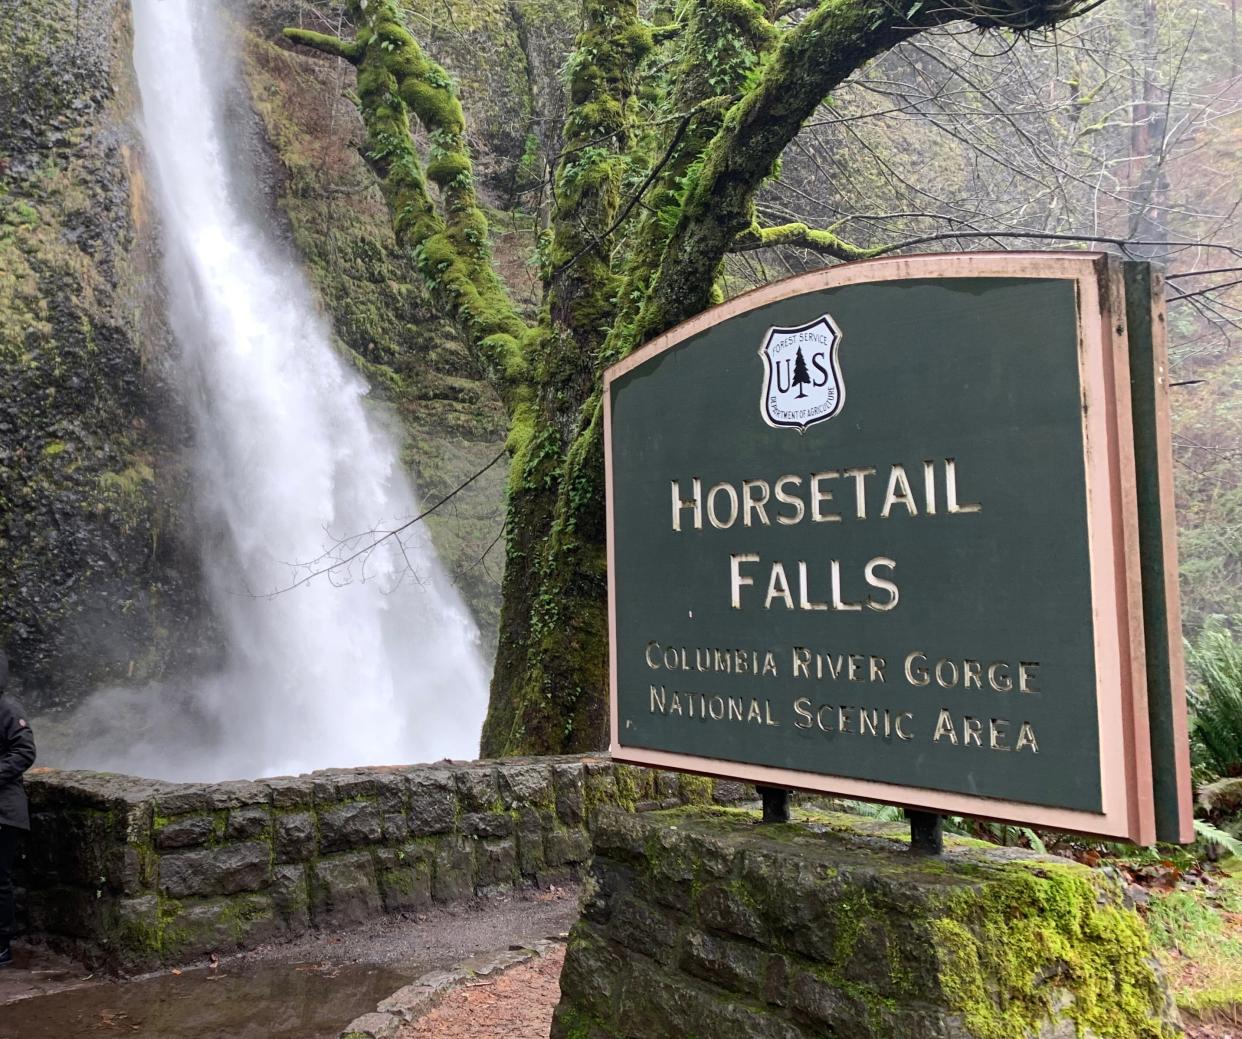 Horsetail Falls Trailhead in the Columbia River Gorge.